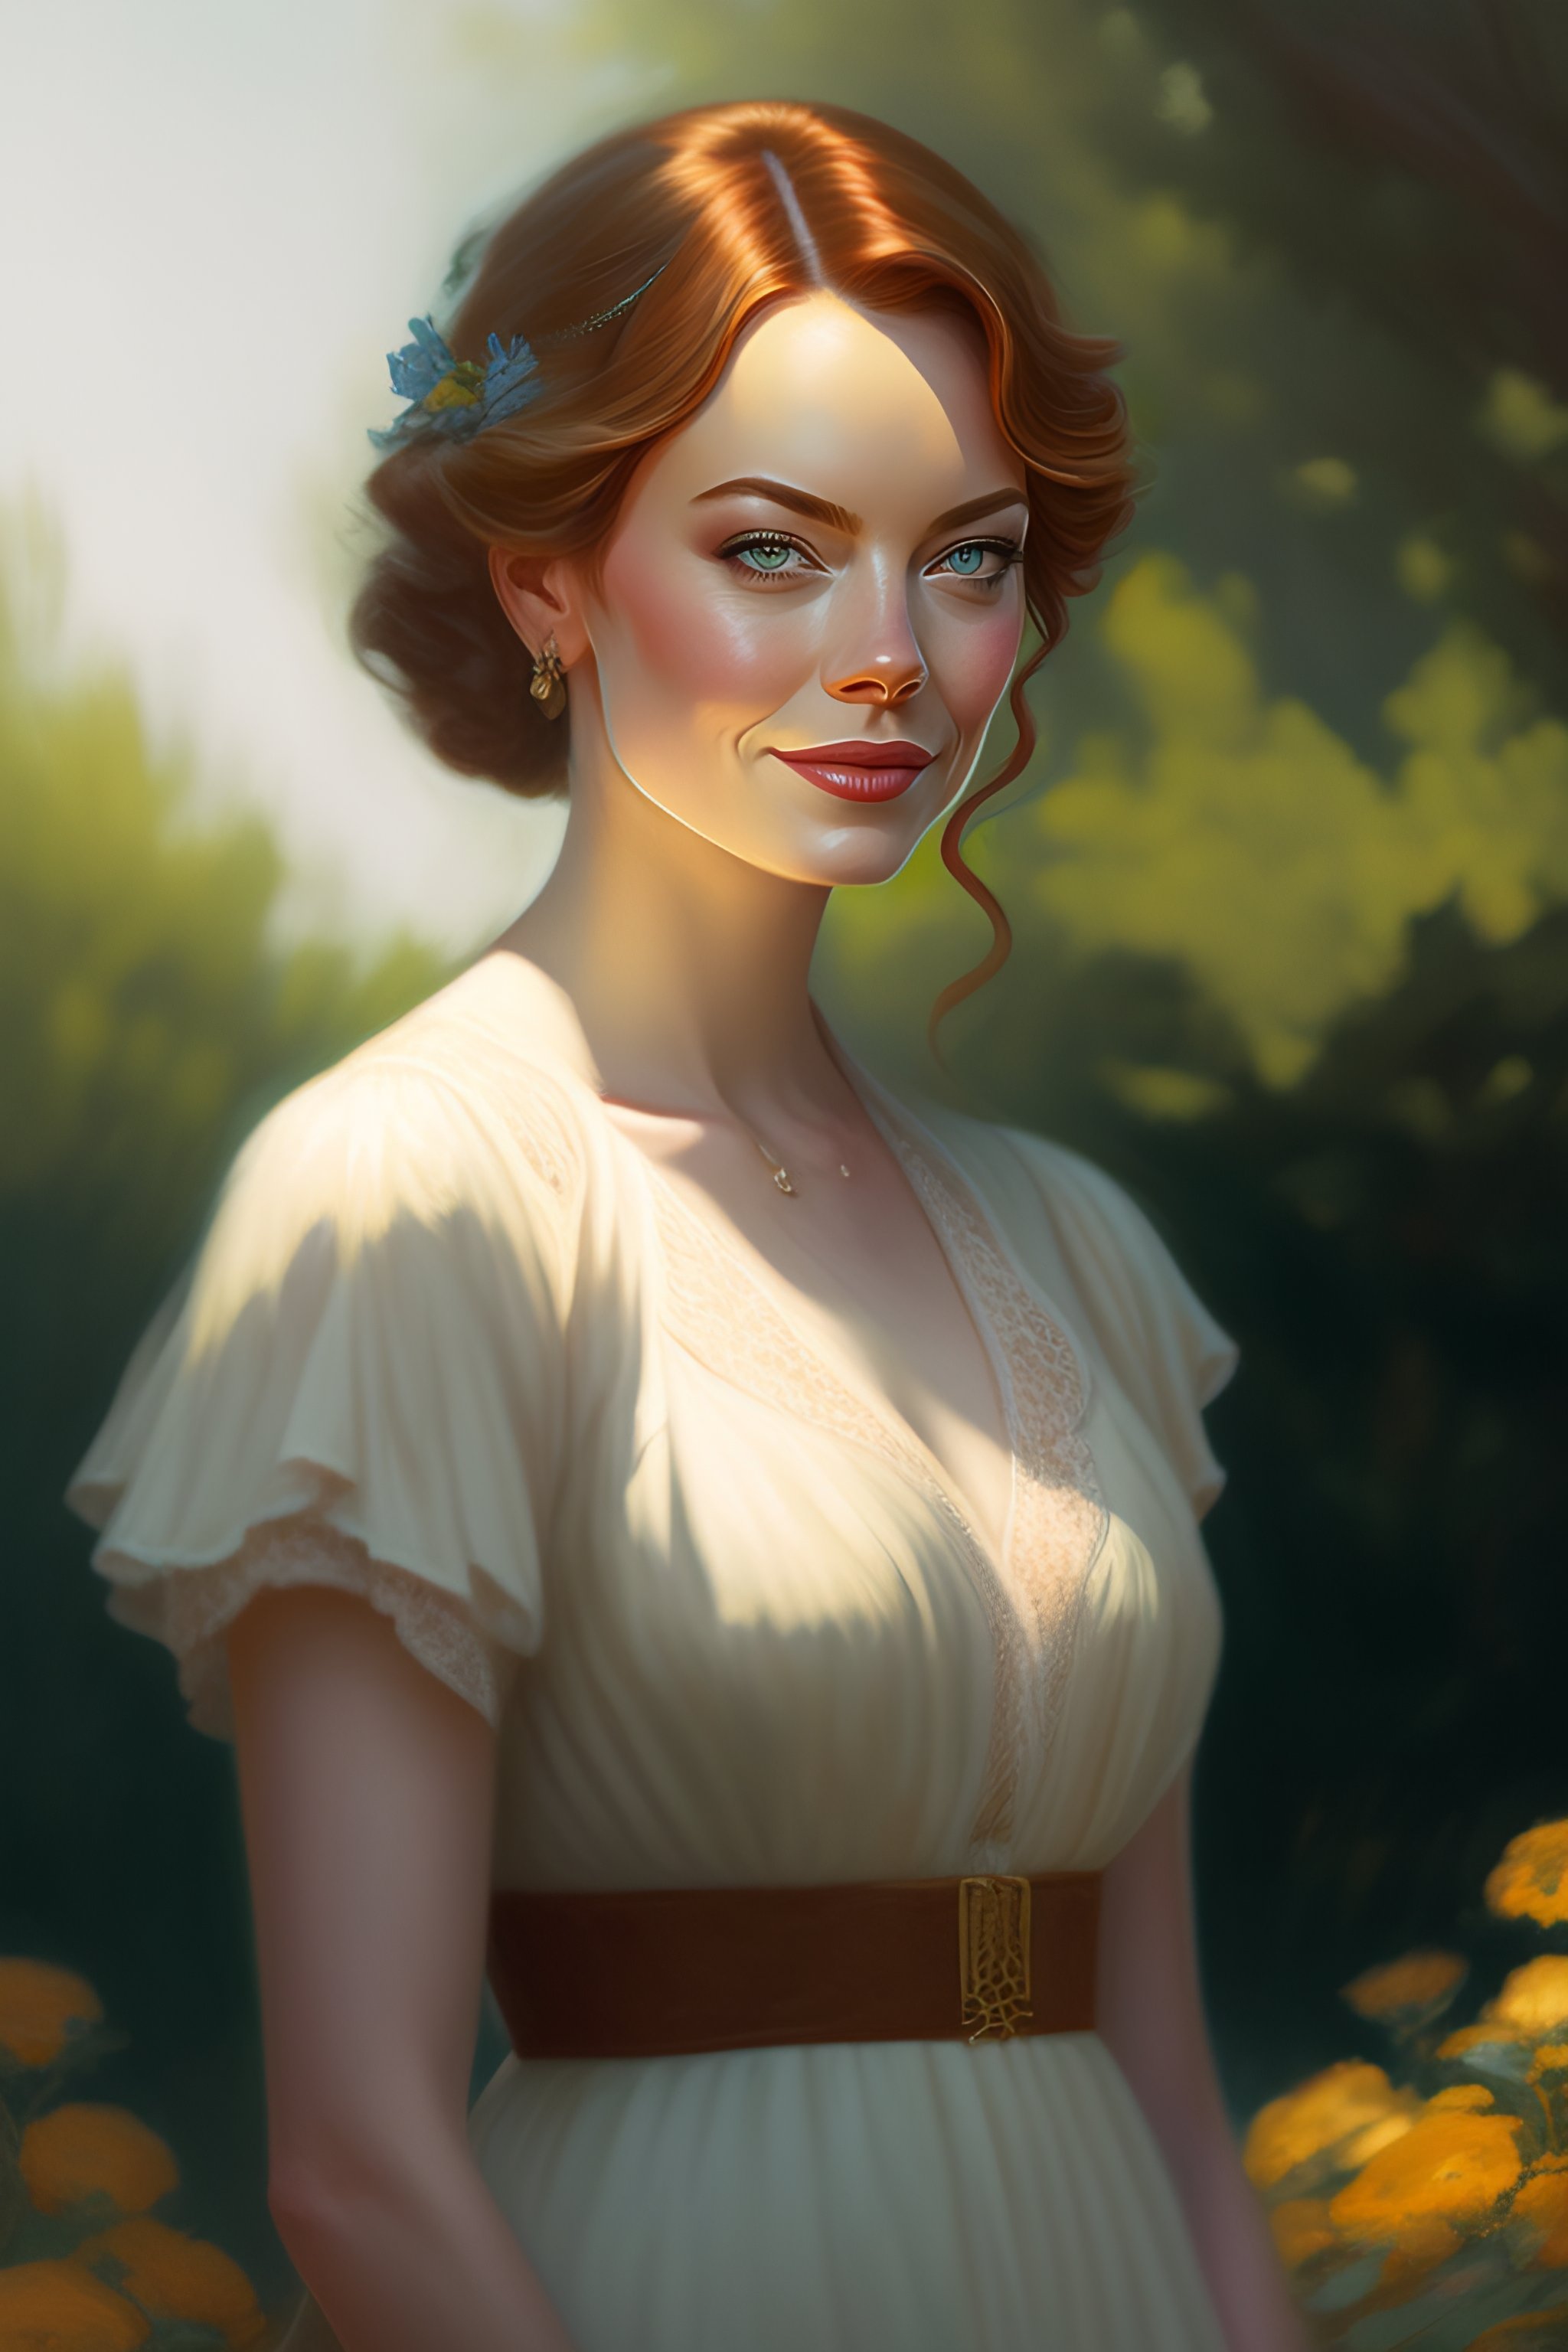 Lexica - Portrait of a middle-aged woman based on Emma Stone in